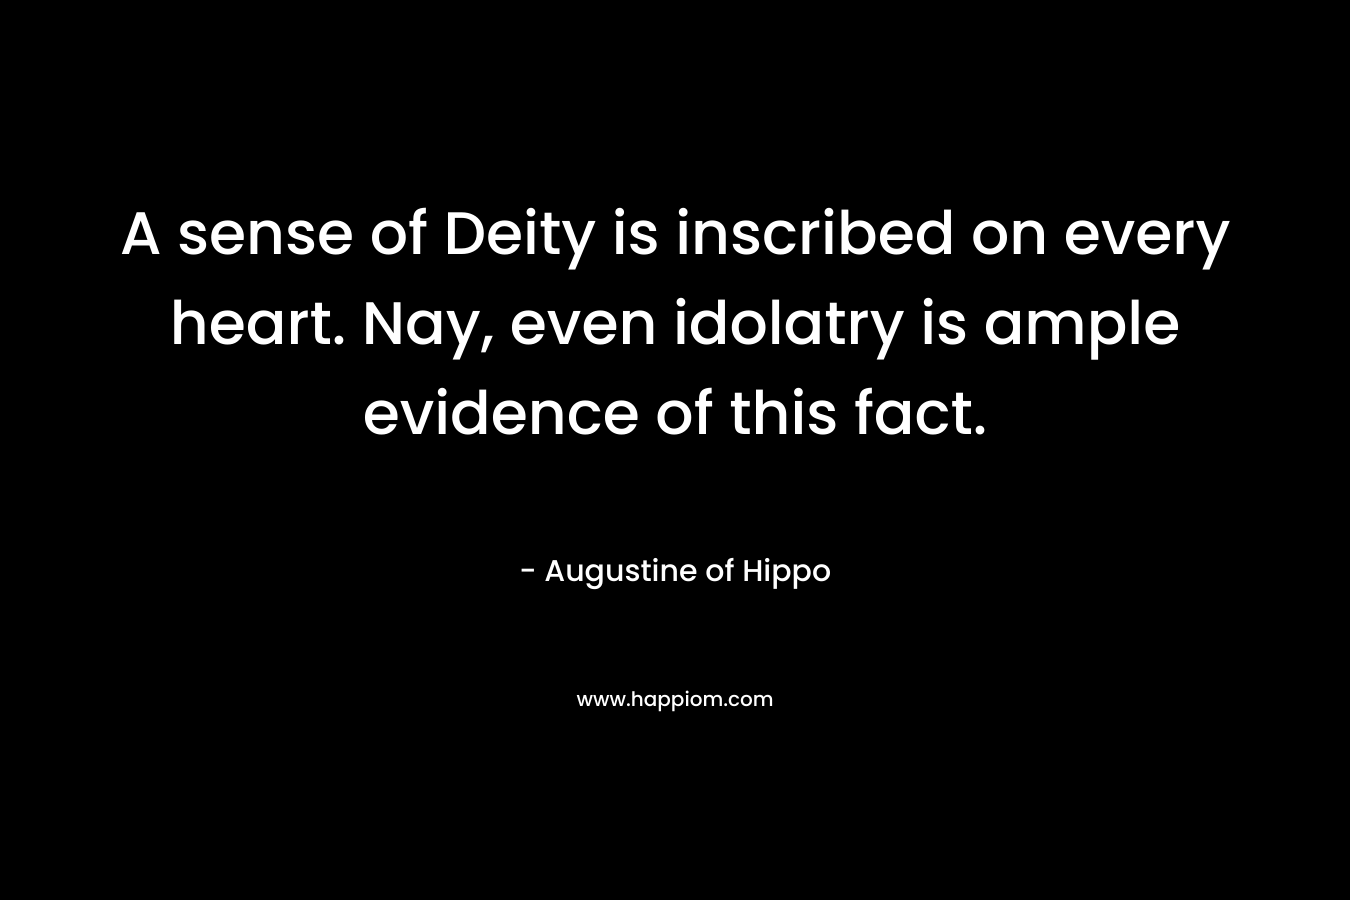 A sense of Deity is inscribed on every heart. Nay, even idolatry is ample evidence of this fact. – Augustine of Hippo